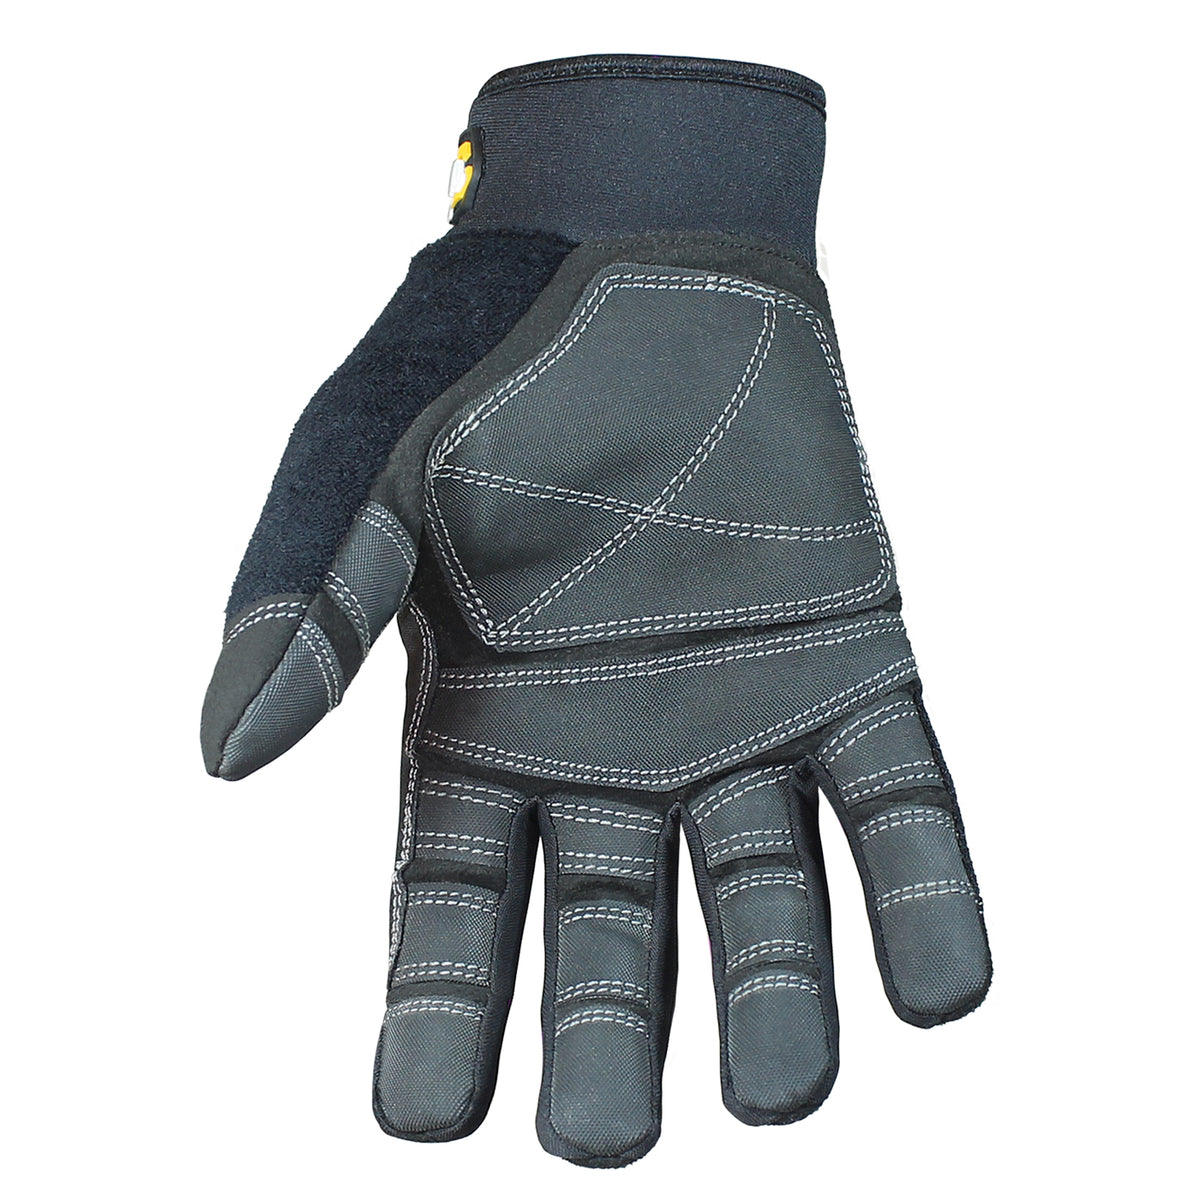 Youngstown Glove Cut Resistant General Utility Synthetic Work Gloves For  Men - Kevlar Lined - Gray, Small